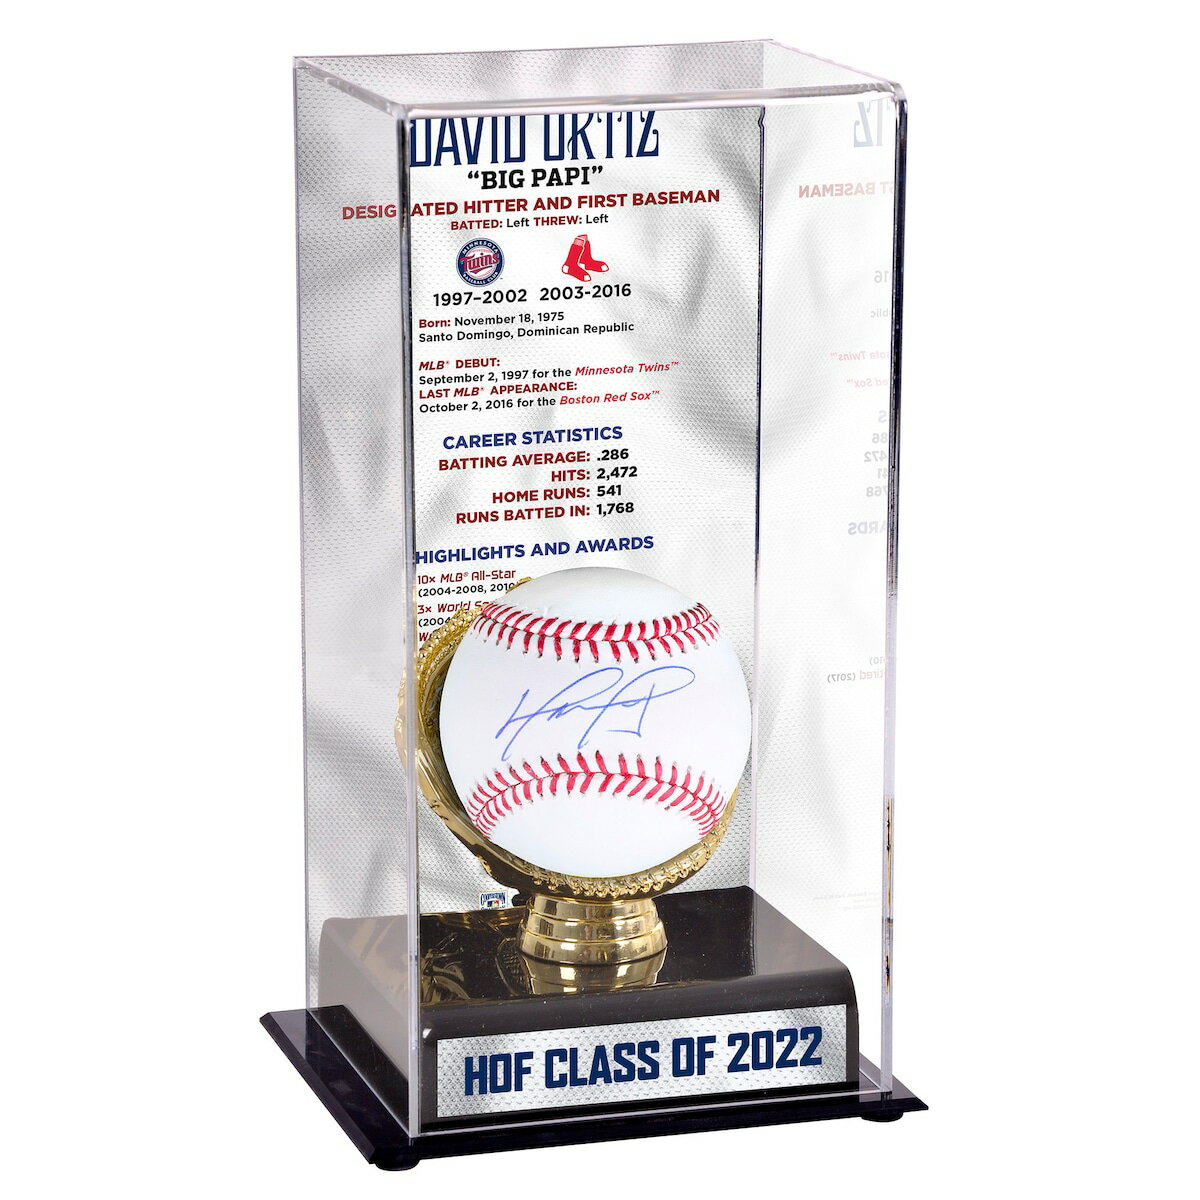 Commemorate the historic career of Boston Red Sox legend David Ortiz with this autographed Baseball with Career Statisti...